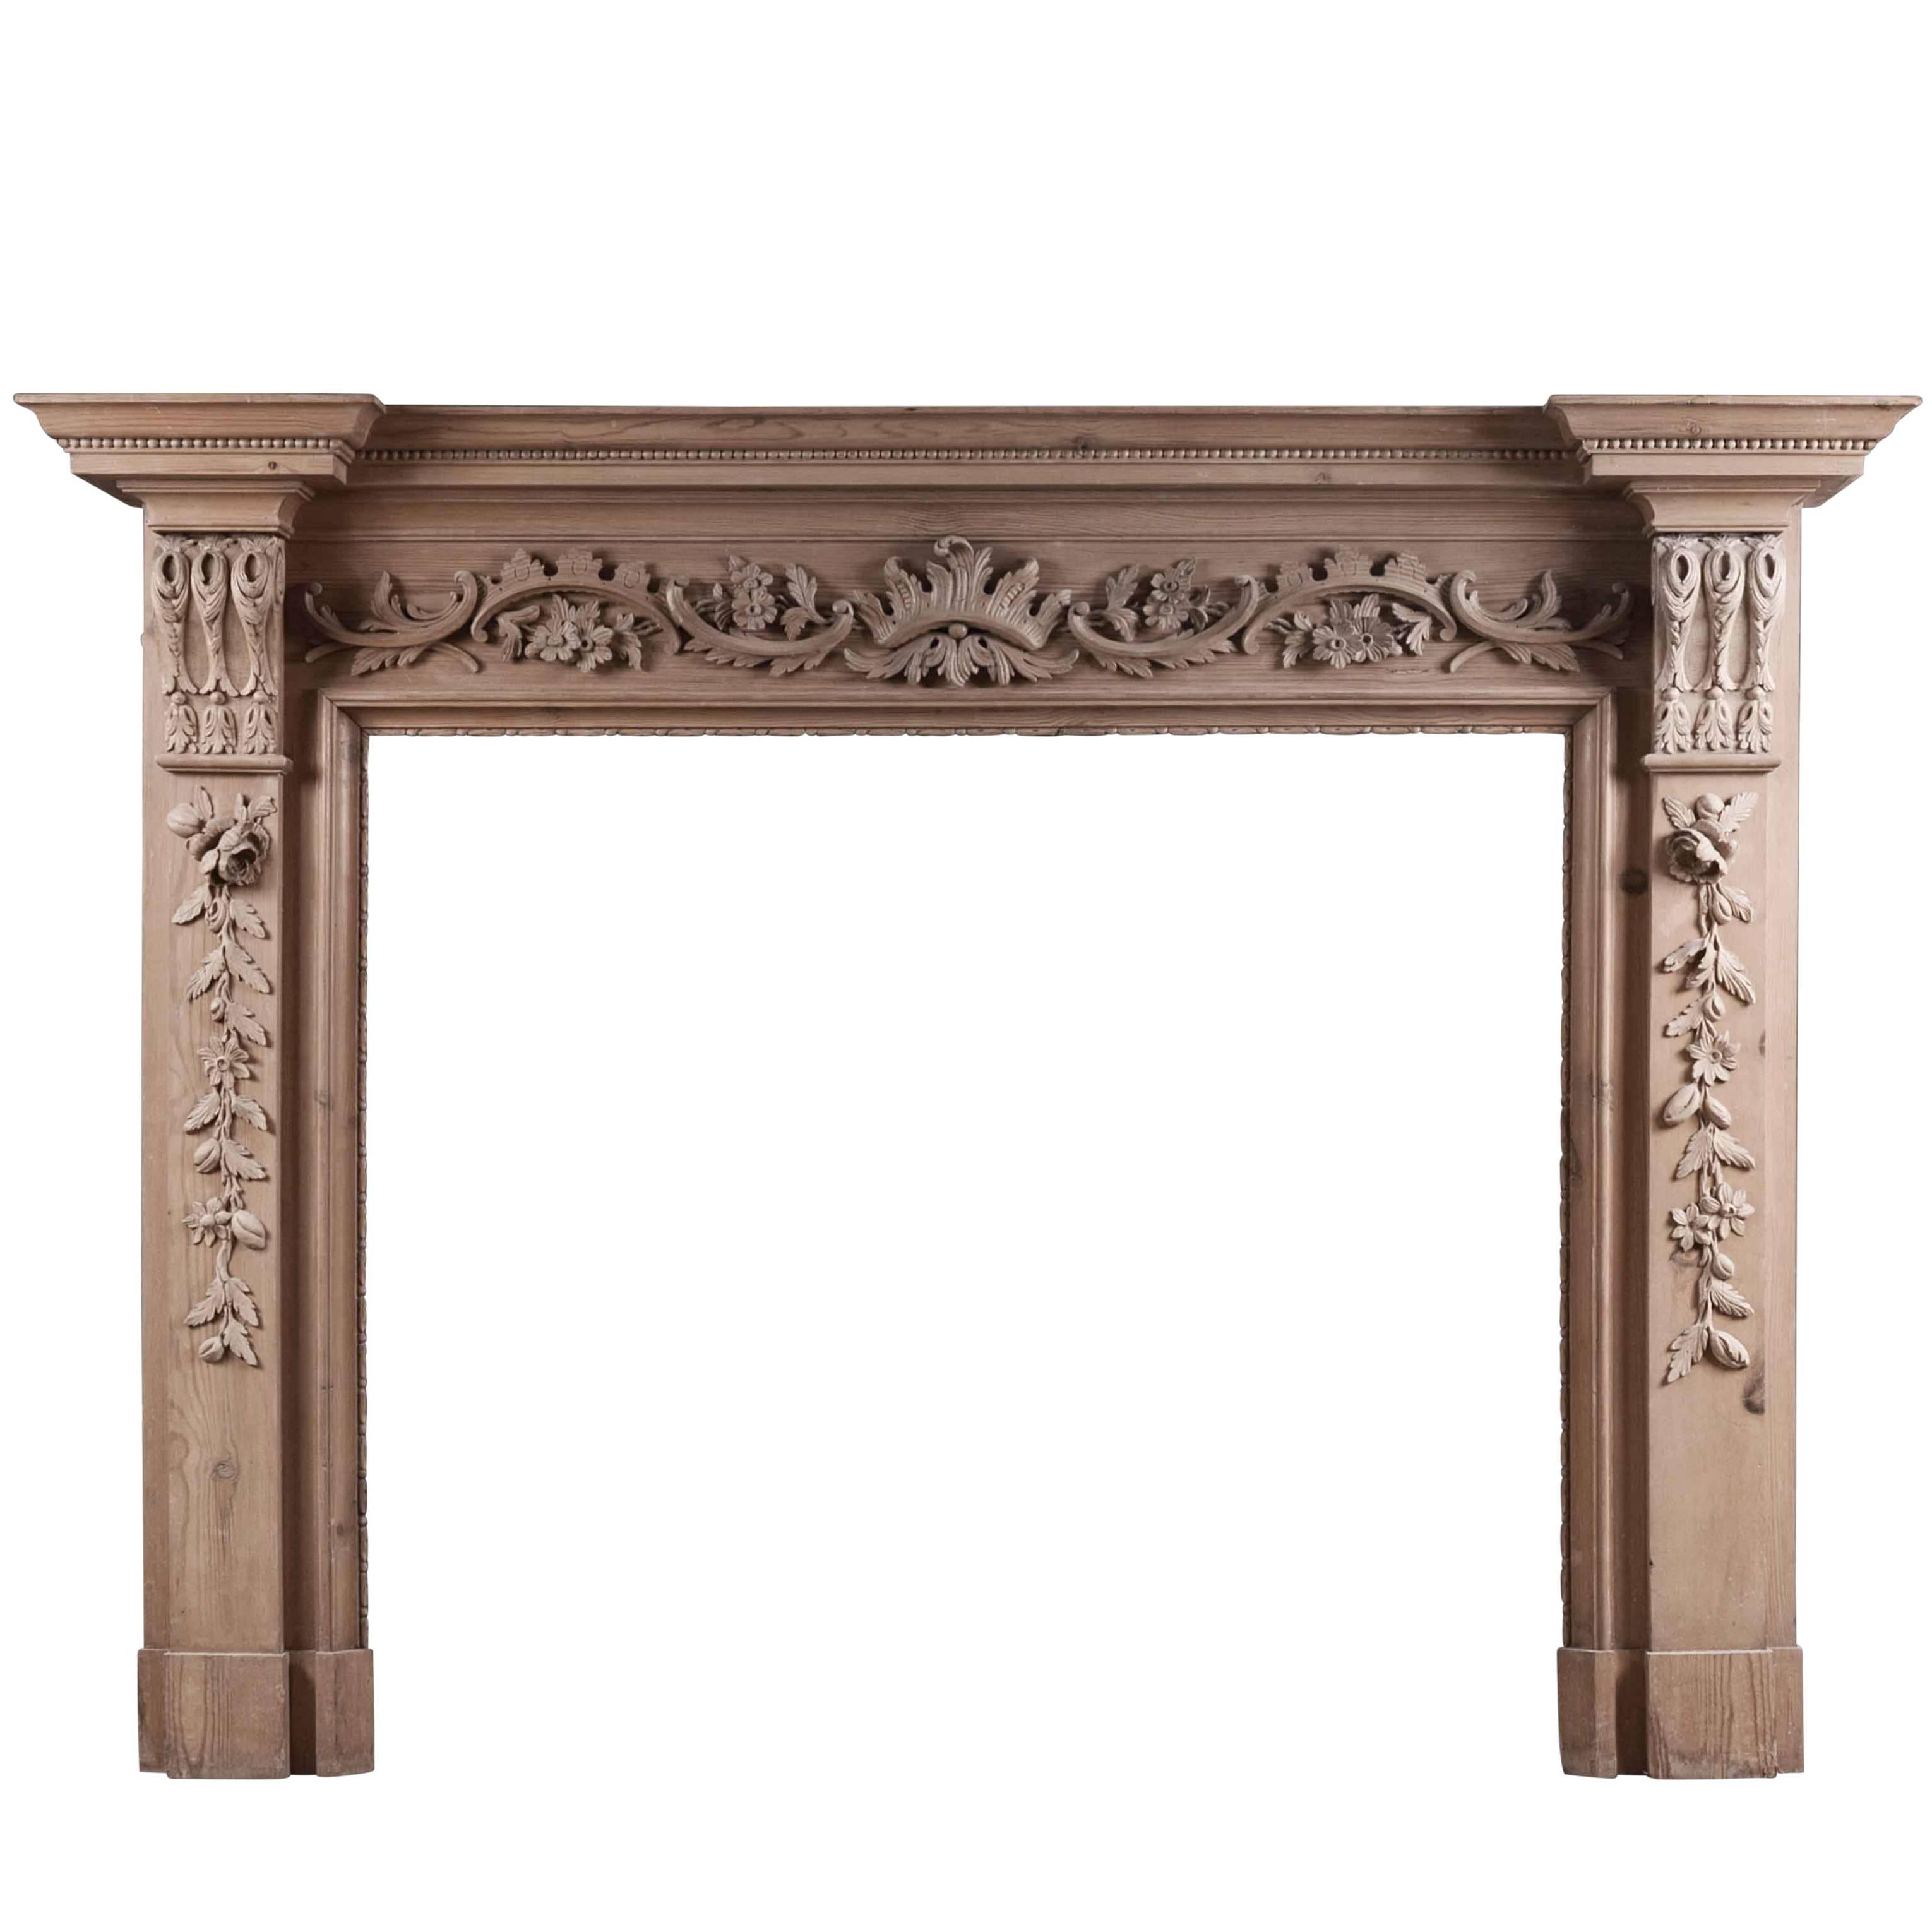 English Pine Fireplace with Carved Fruit & Foliage For Sale